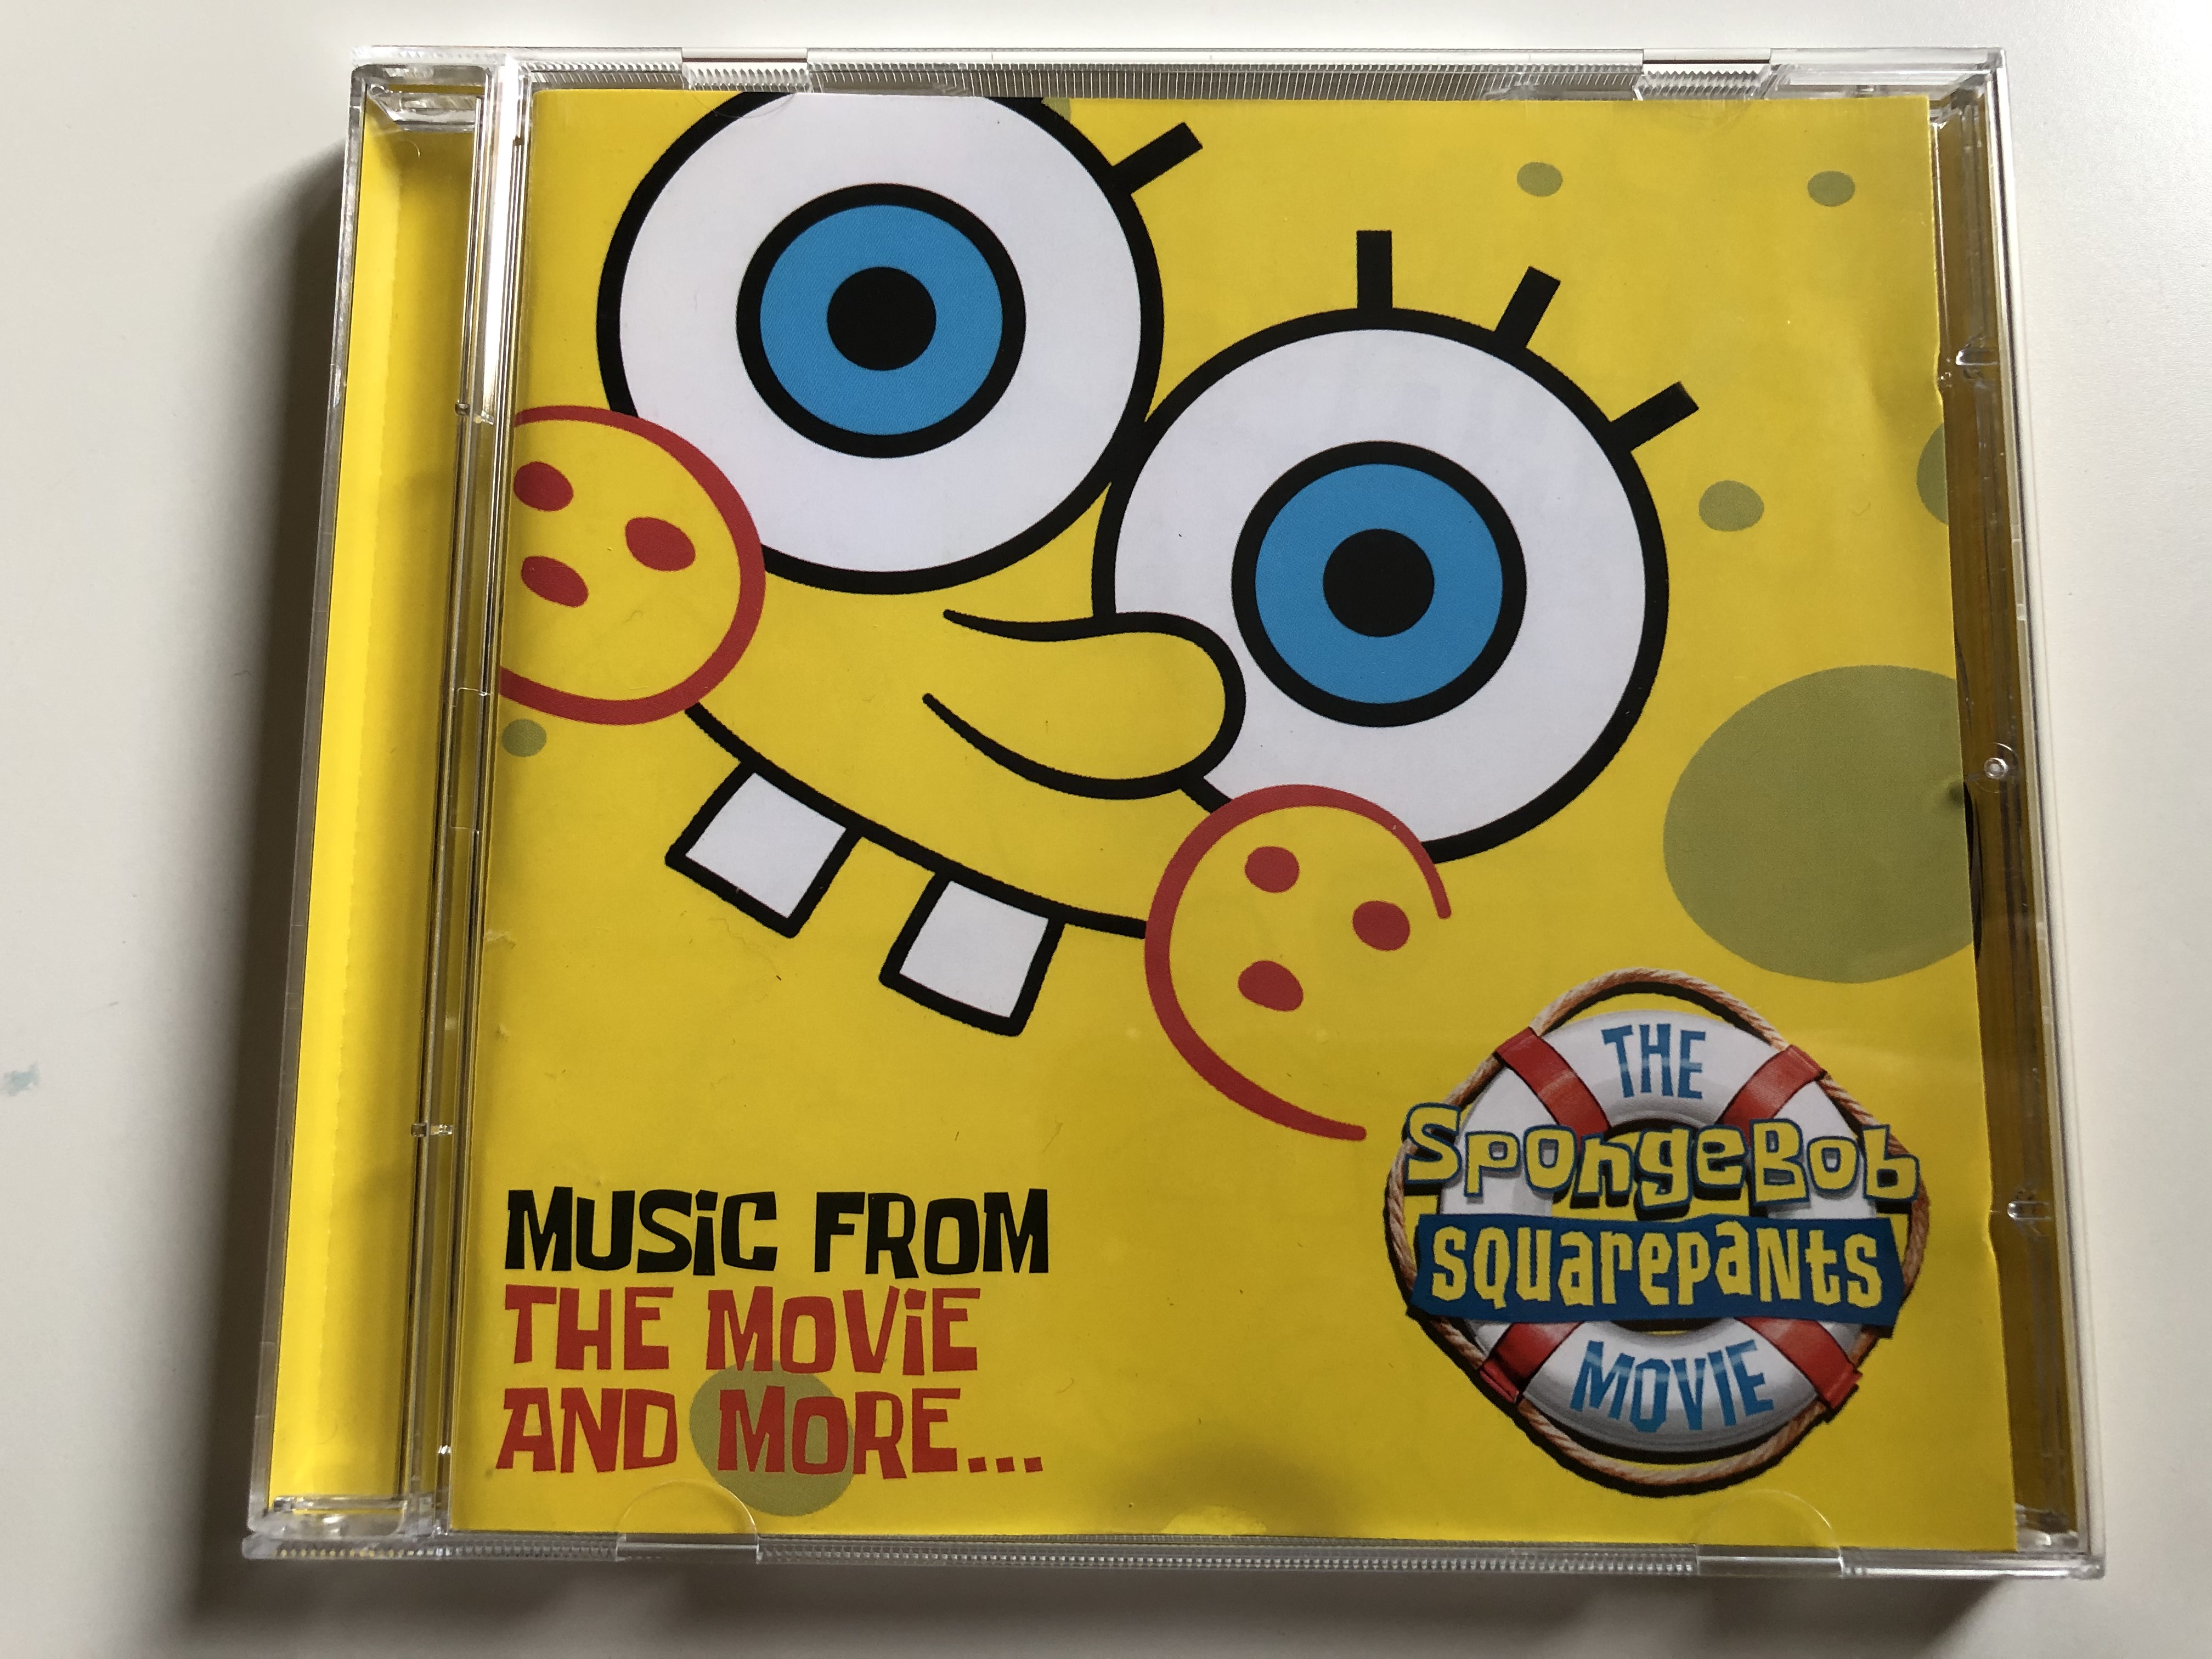 the-spongebob-squarepants-movie-music-from-the-movie-and-more...-sire-audio-cd-2004-9362-48888-2-1-.jpg